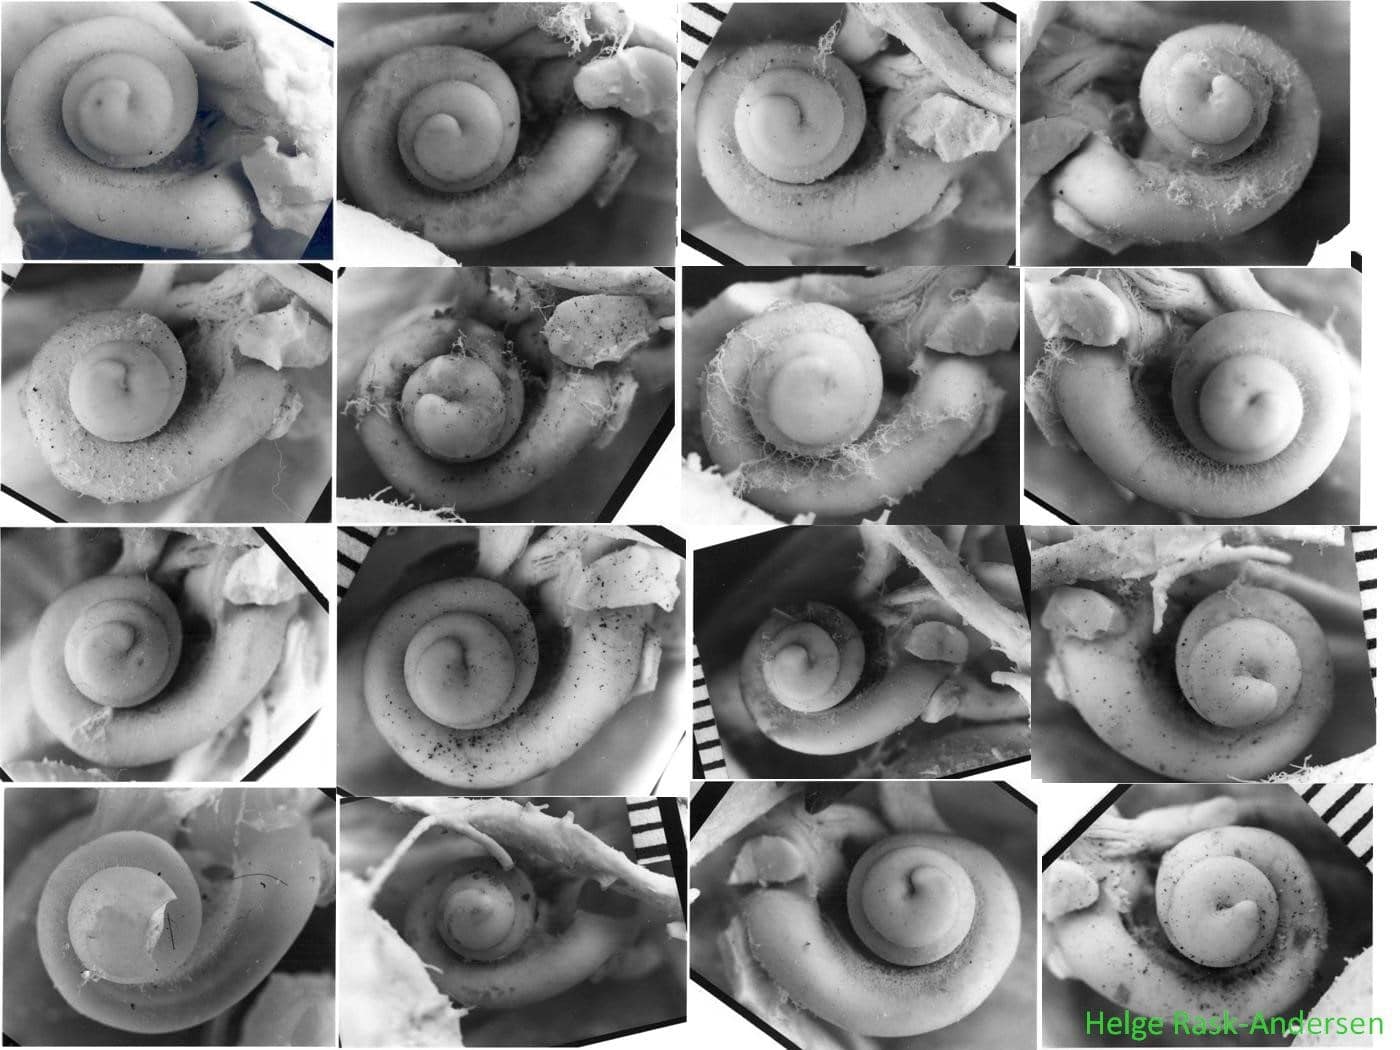 Cochlea images